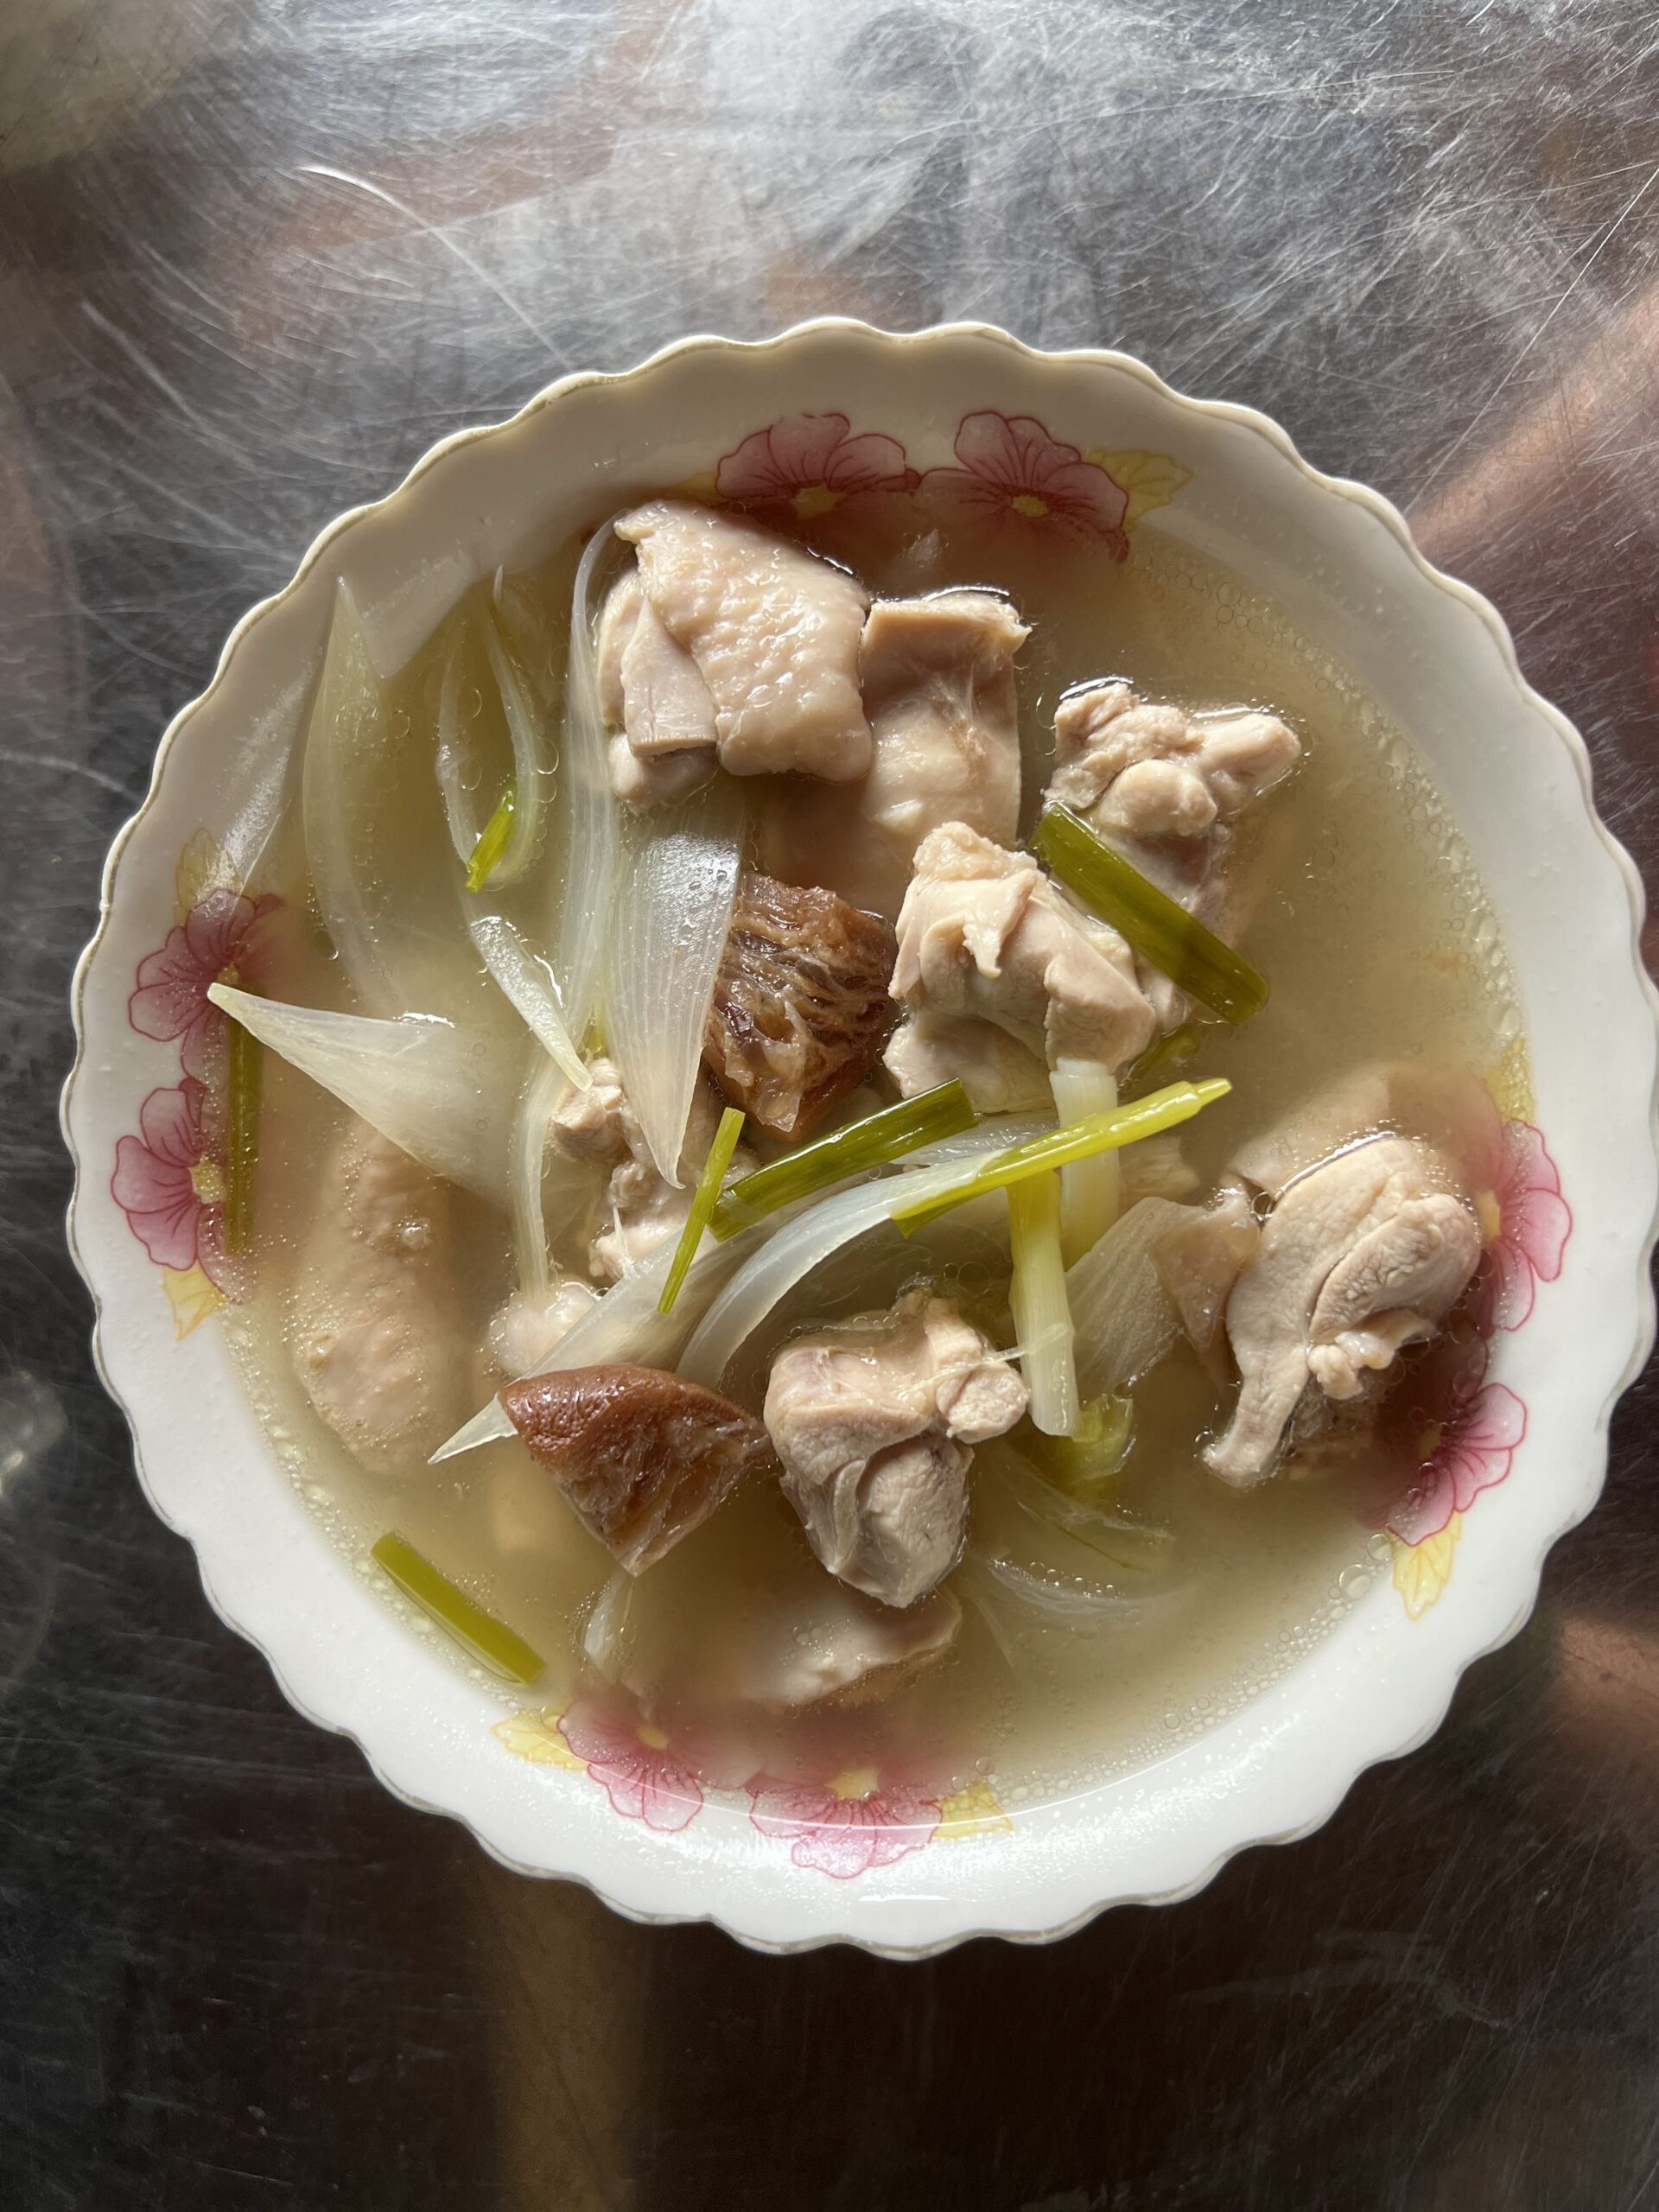 The sour lime soup with chicken